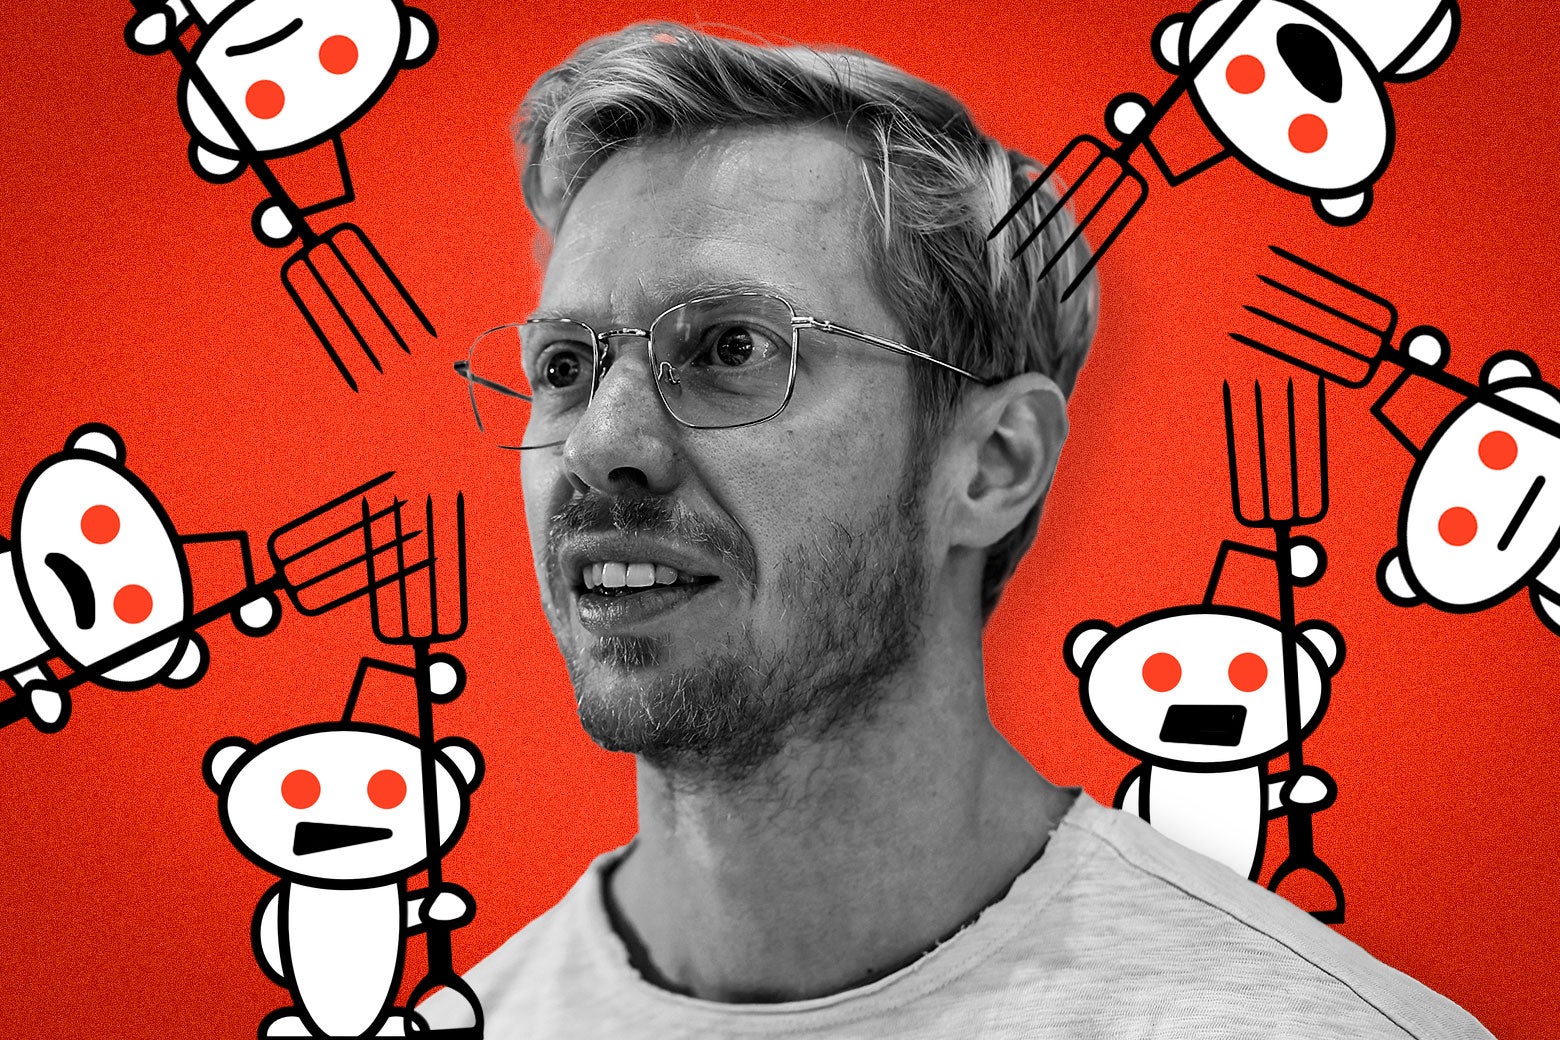 Moderators are uneasy about Reddit's accessibility features : NPR